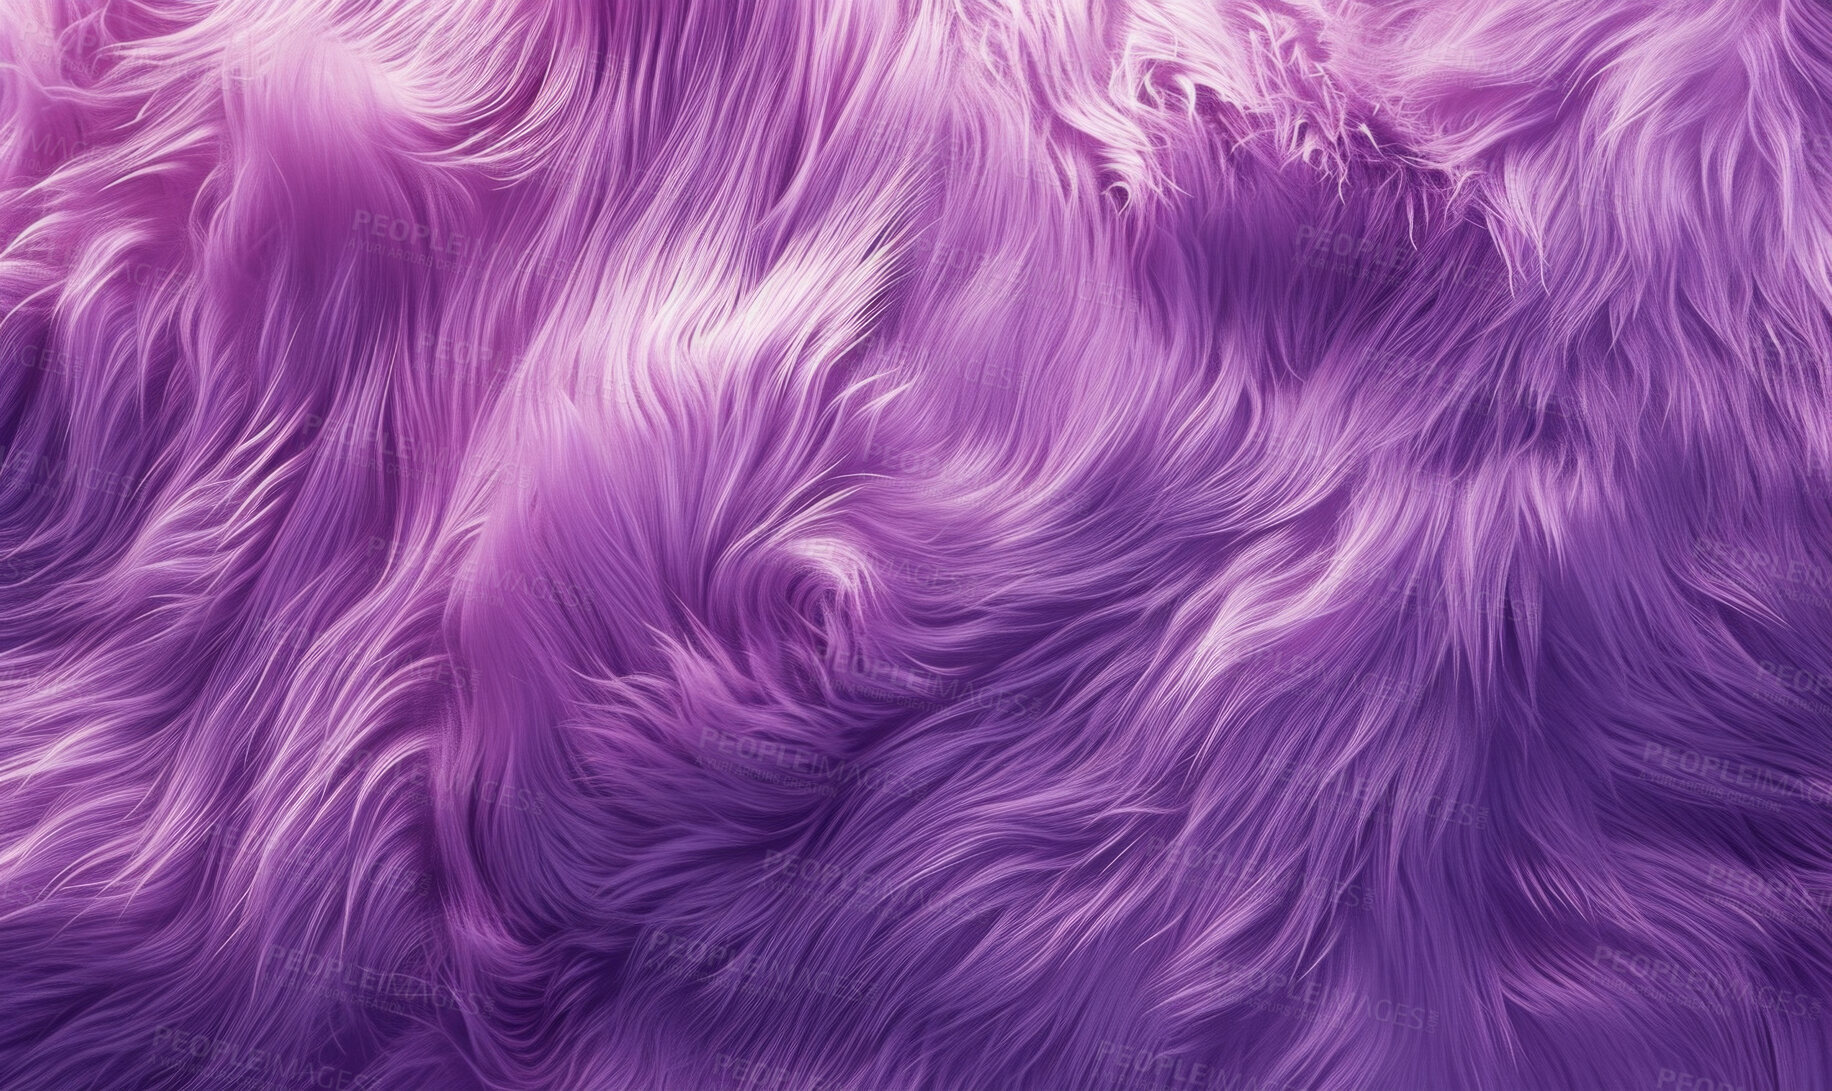 Buy stock photo Abstract, colour and fur detail background for digital design concept, poster or wallpaper. Vivid, colourful and purple fluffy surface render for copyspace, mockup or creative inspiration backdrop